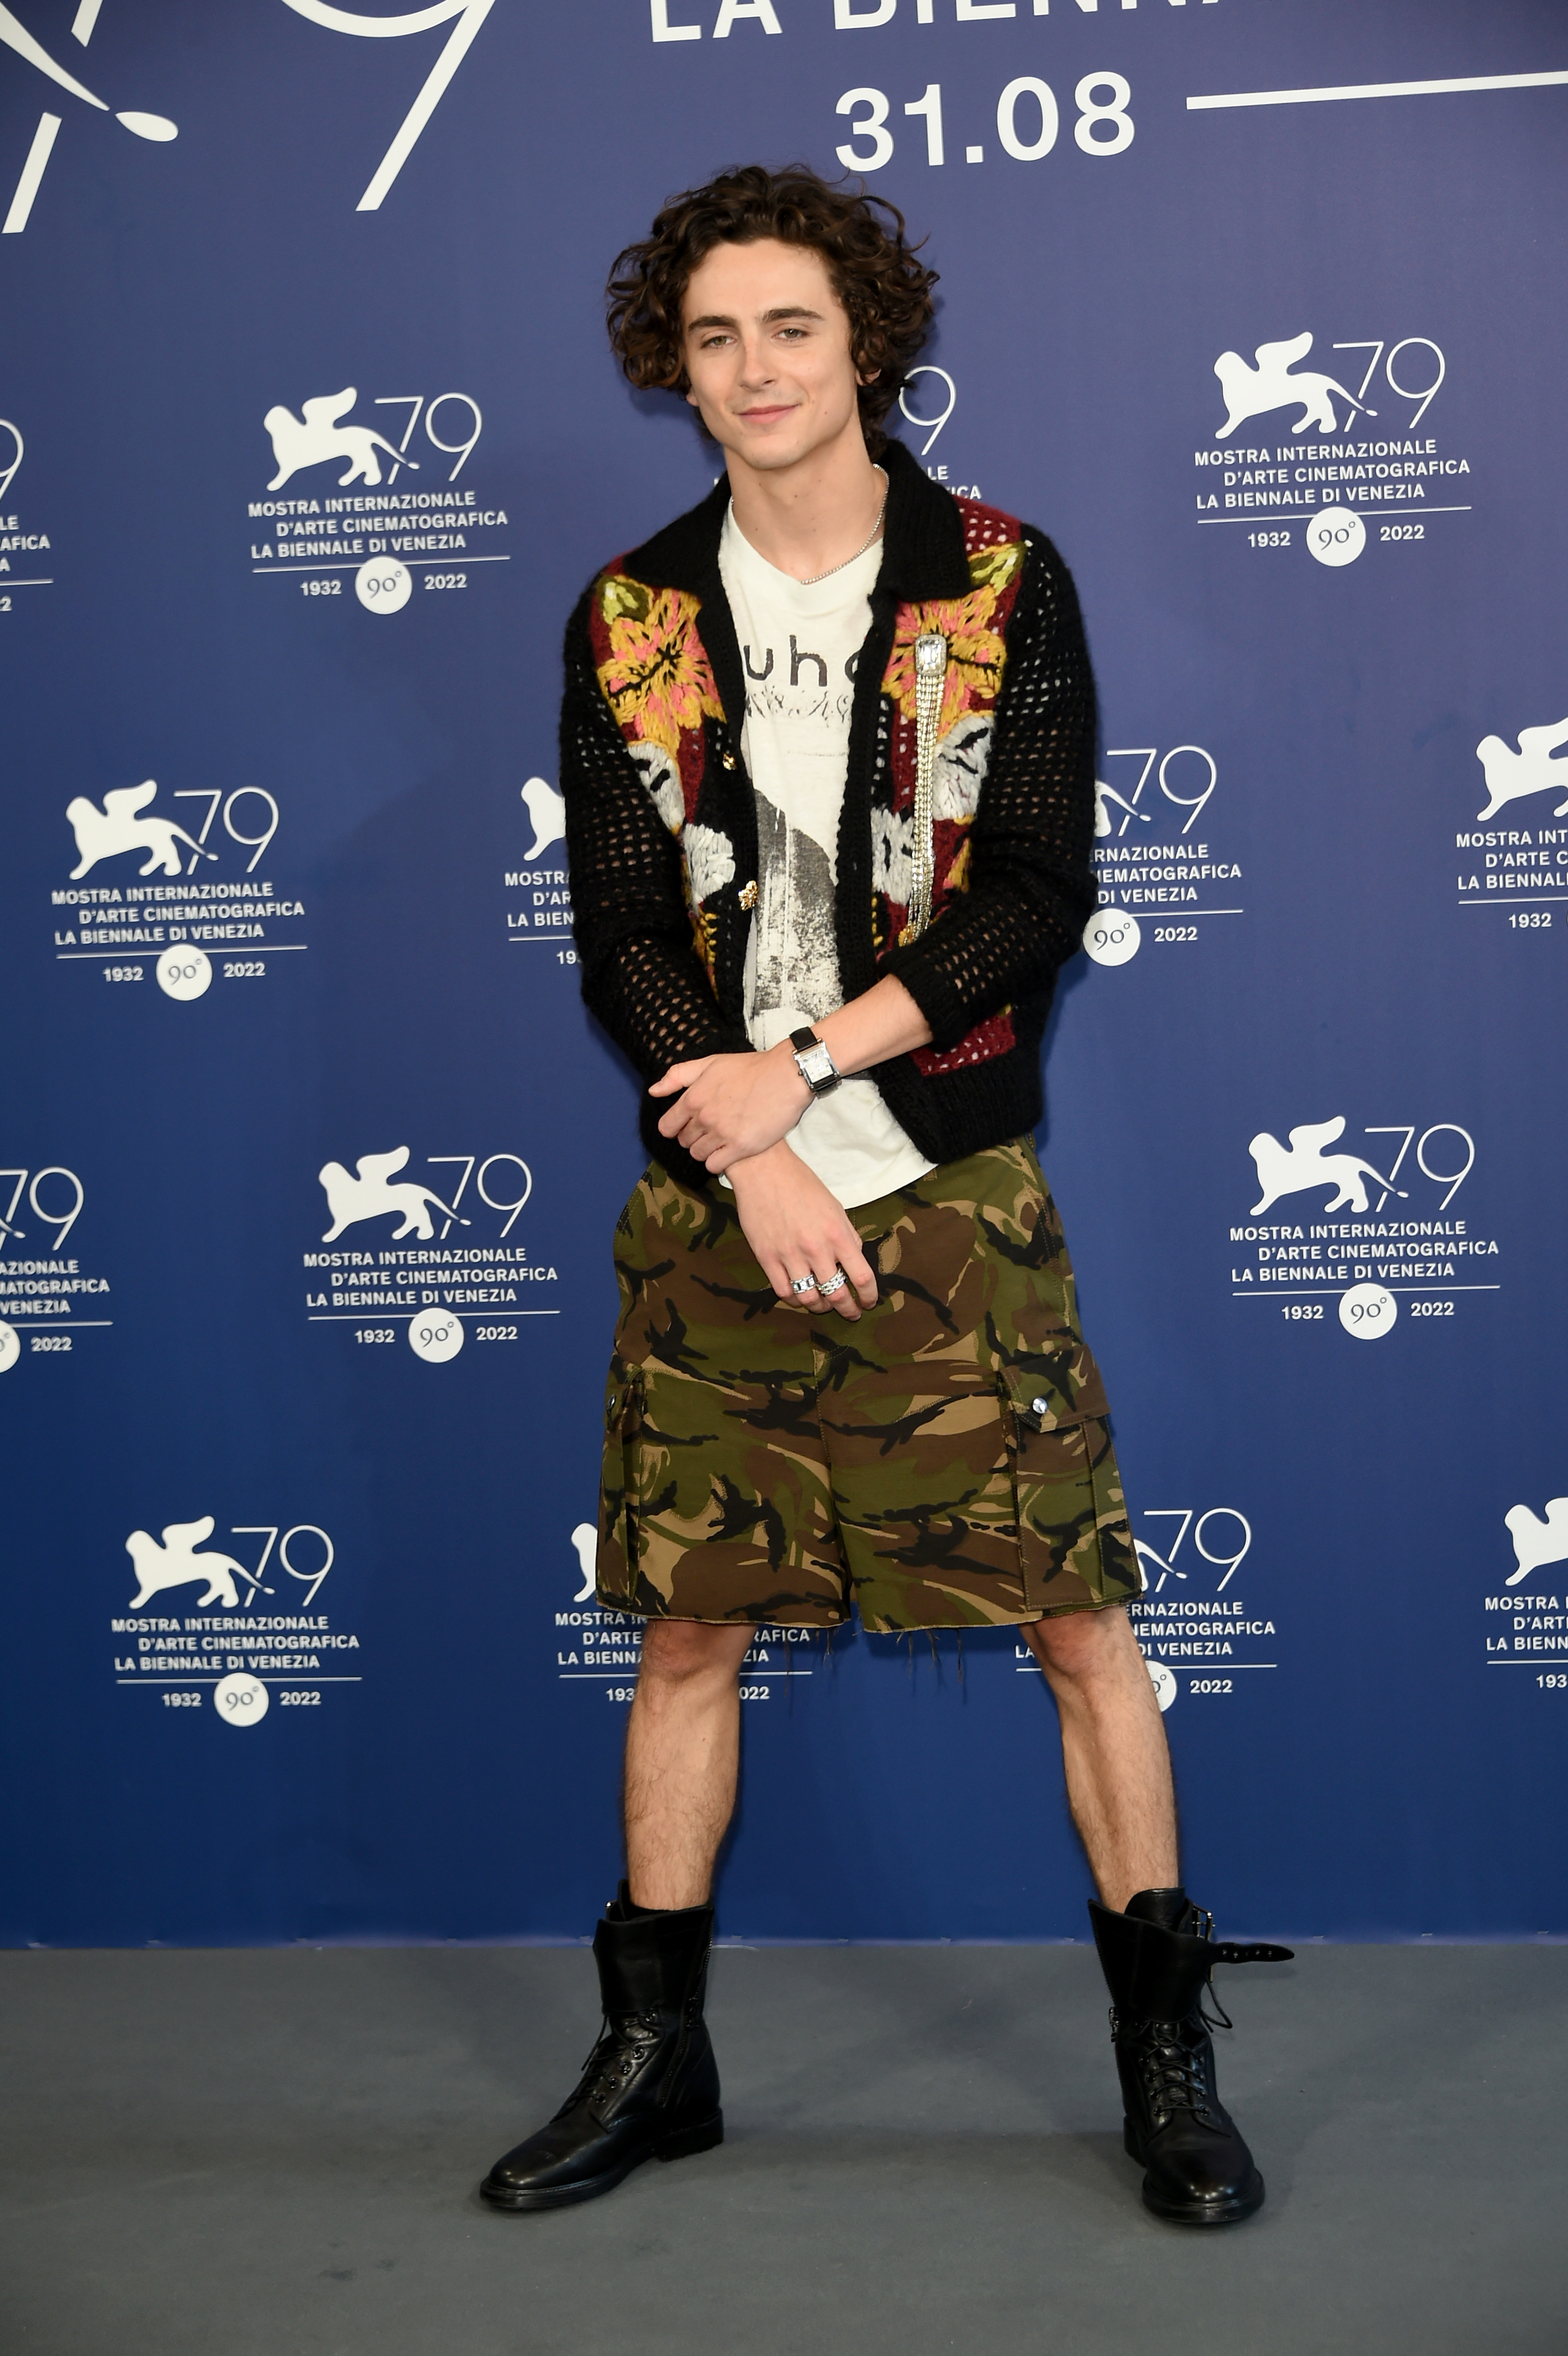 The Photos of Timothee Chalamet's Entrance at the Venice Film Festival Need  to Be Seen!: Photo 4614850, 2021 Venice Film Festival, Timothee Chalamet  Photos